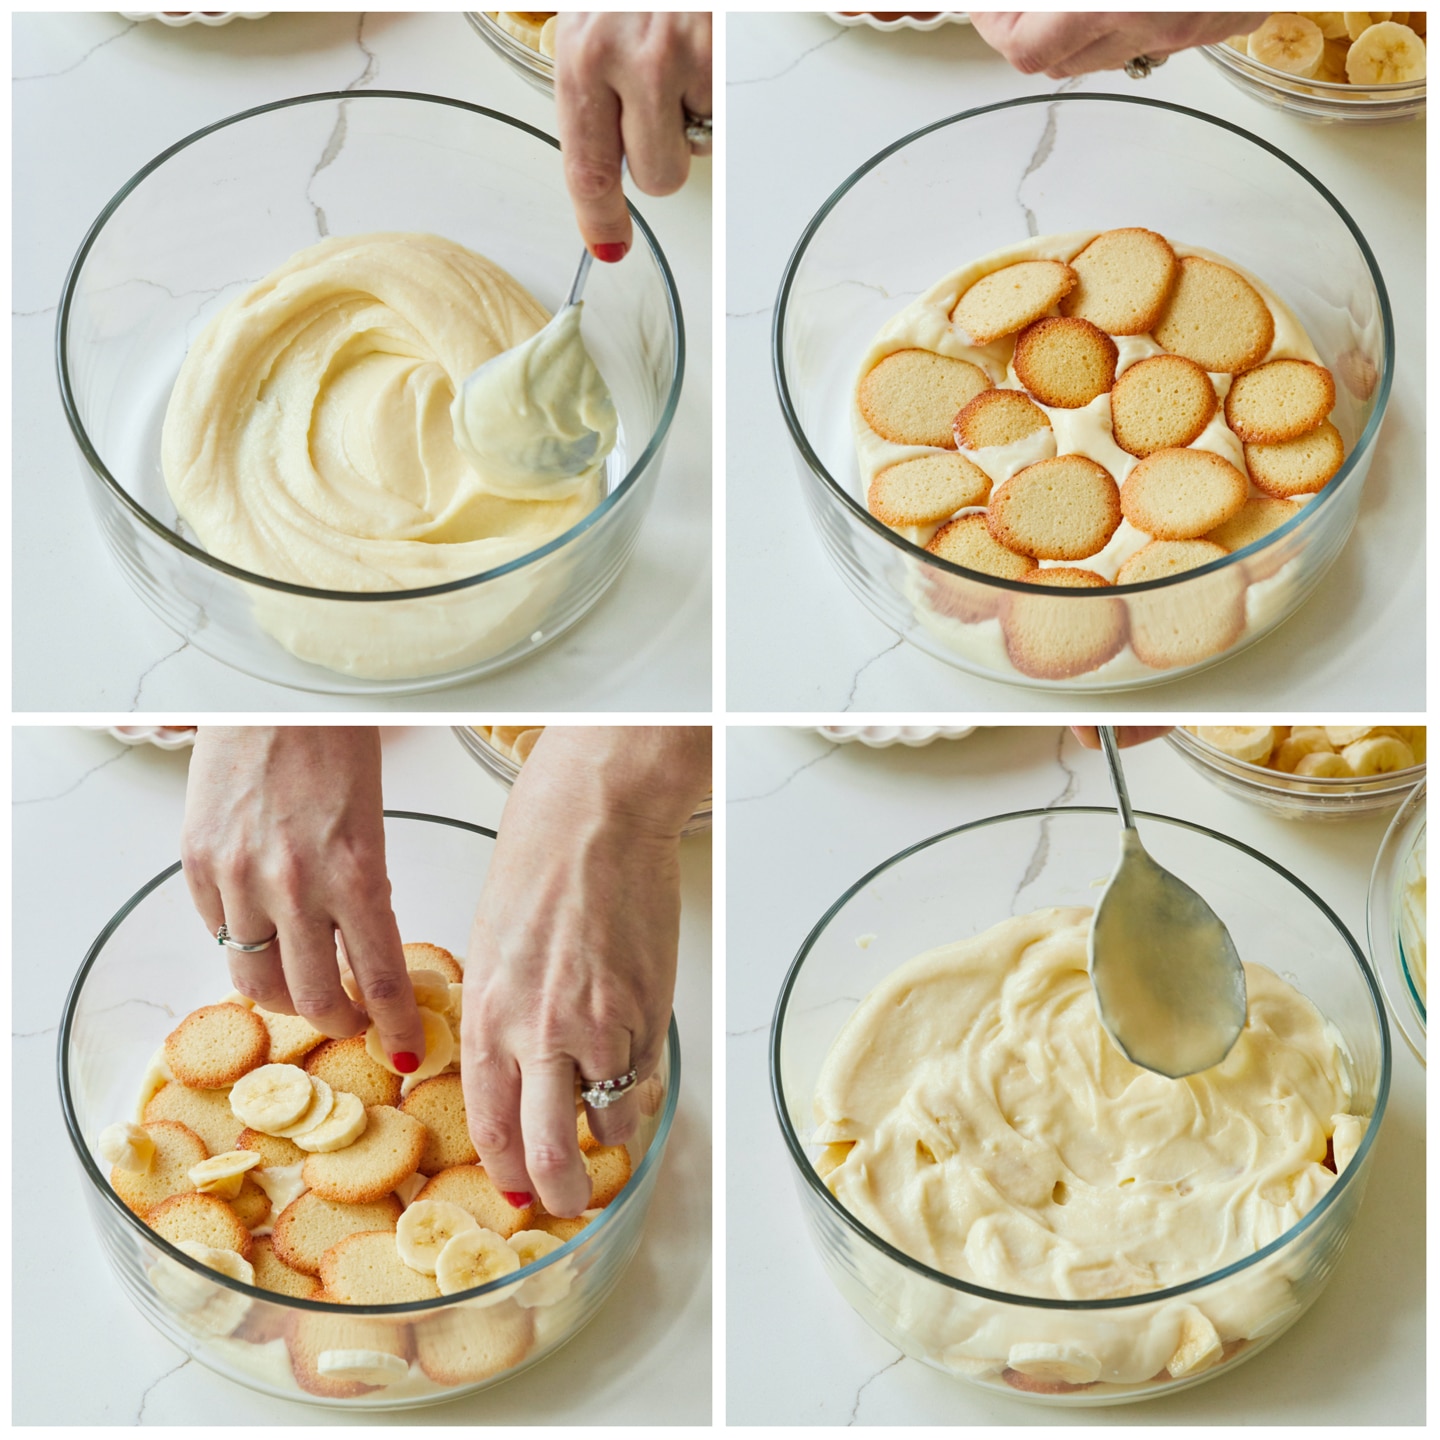 Microwave Banana Pudding Recipe assemble the pudding